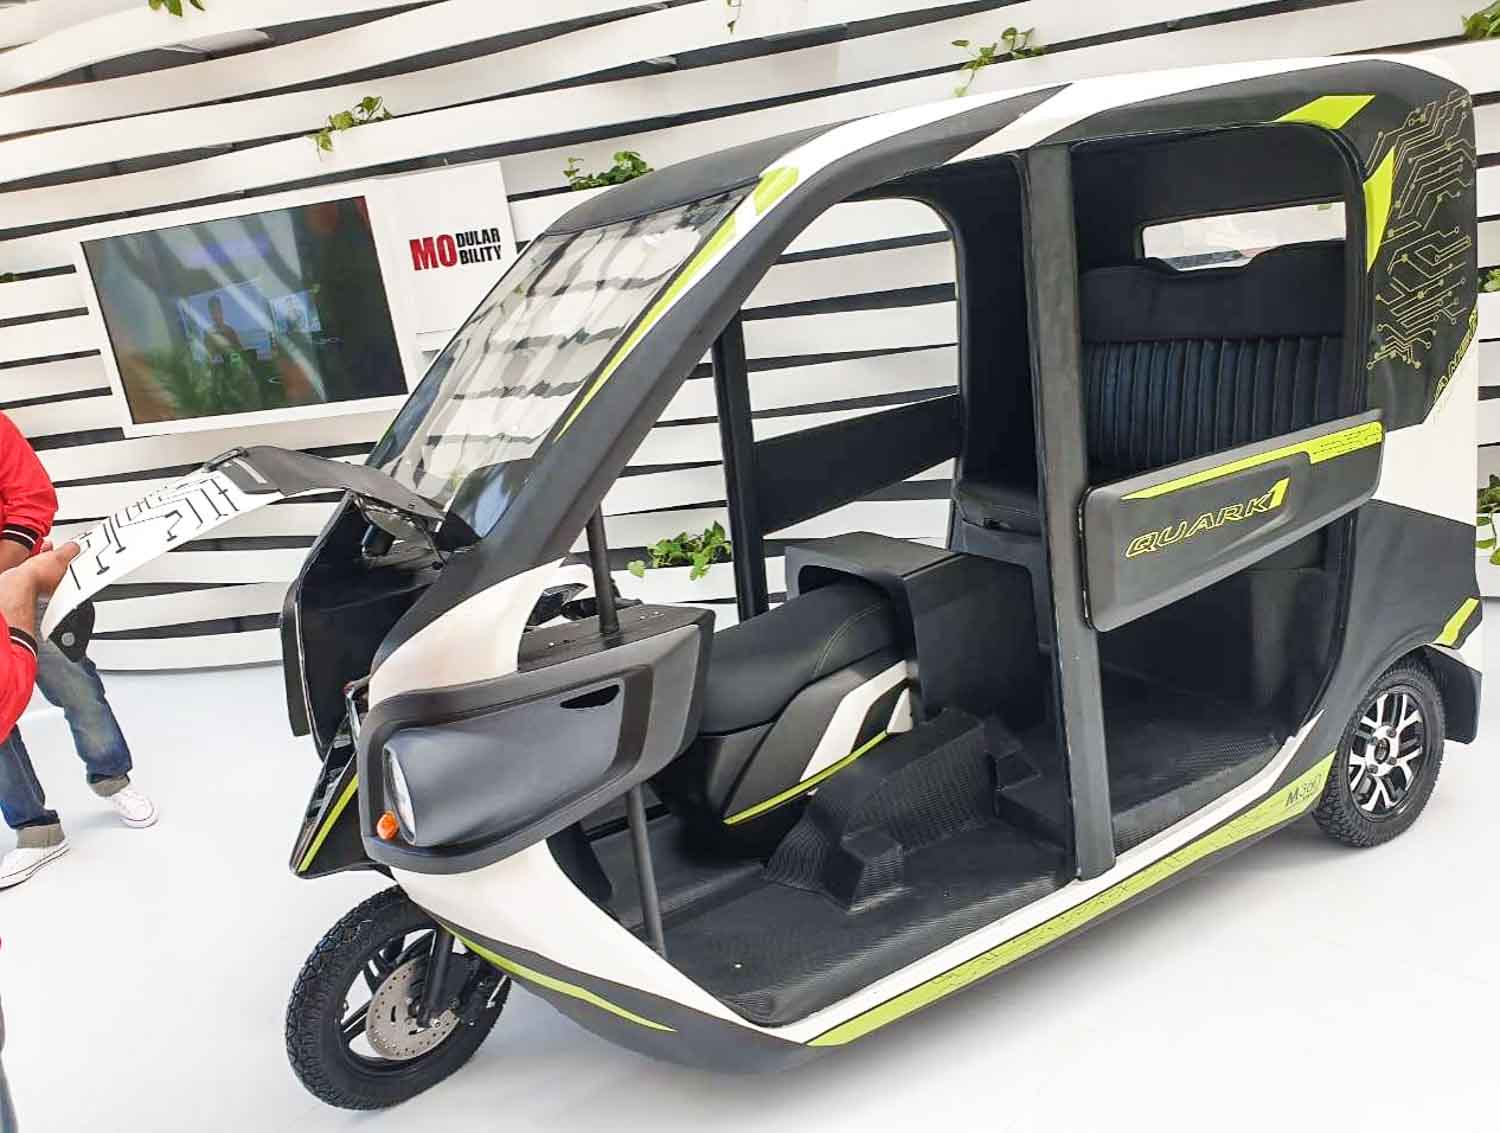 Hero Quark 1 electric concept can be scooter as well as rickshaw